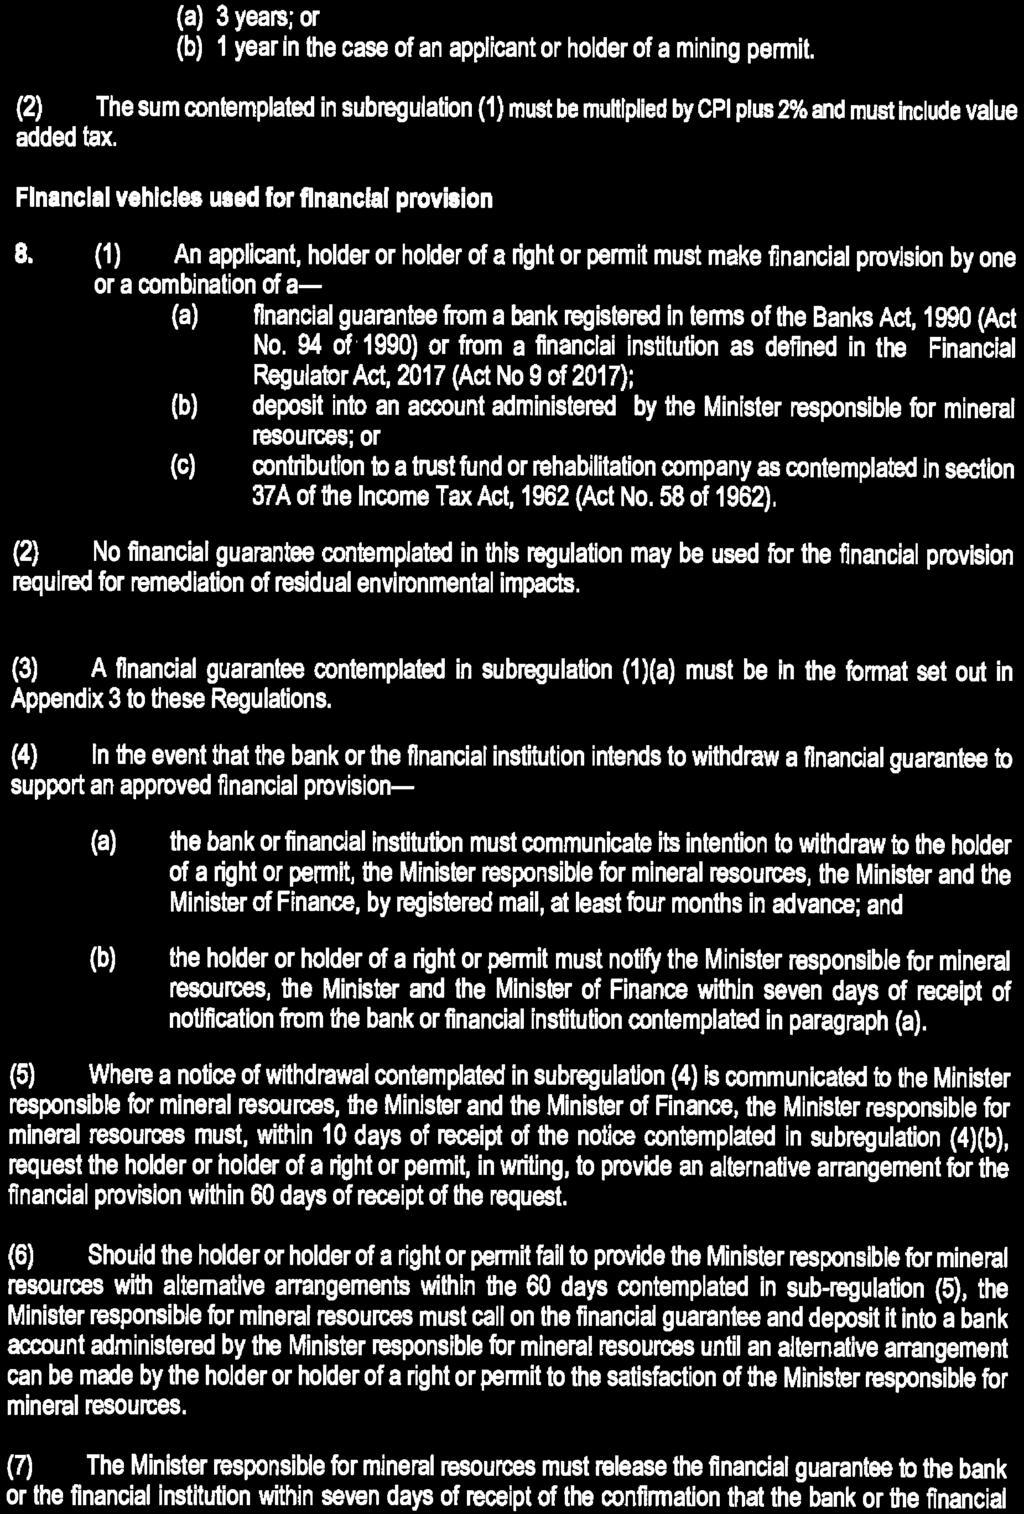 24 No. 41236 GOVERNMENT GAZETTE, 10 NOVEMBER 2017 (a) 3 years; or (b) 1 year in the case of an applicant or holder of a mining permit.